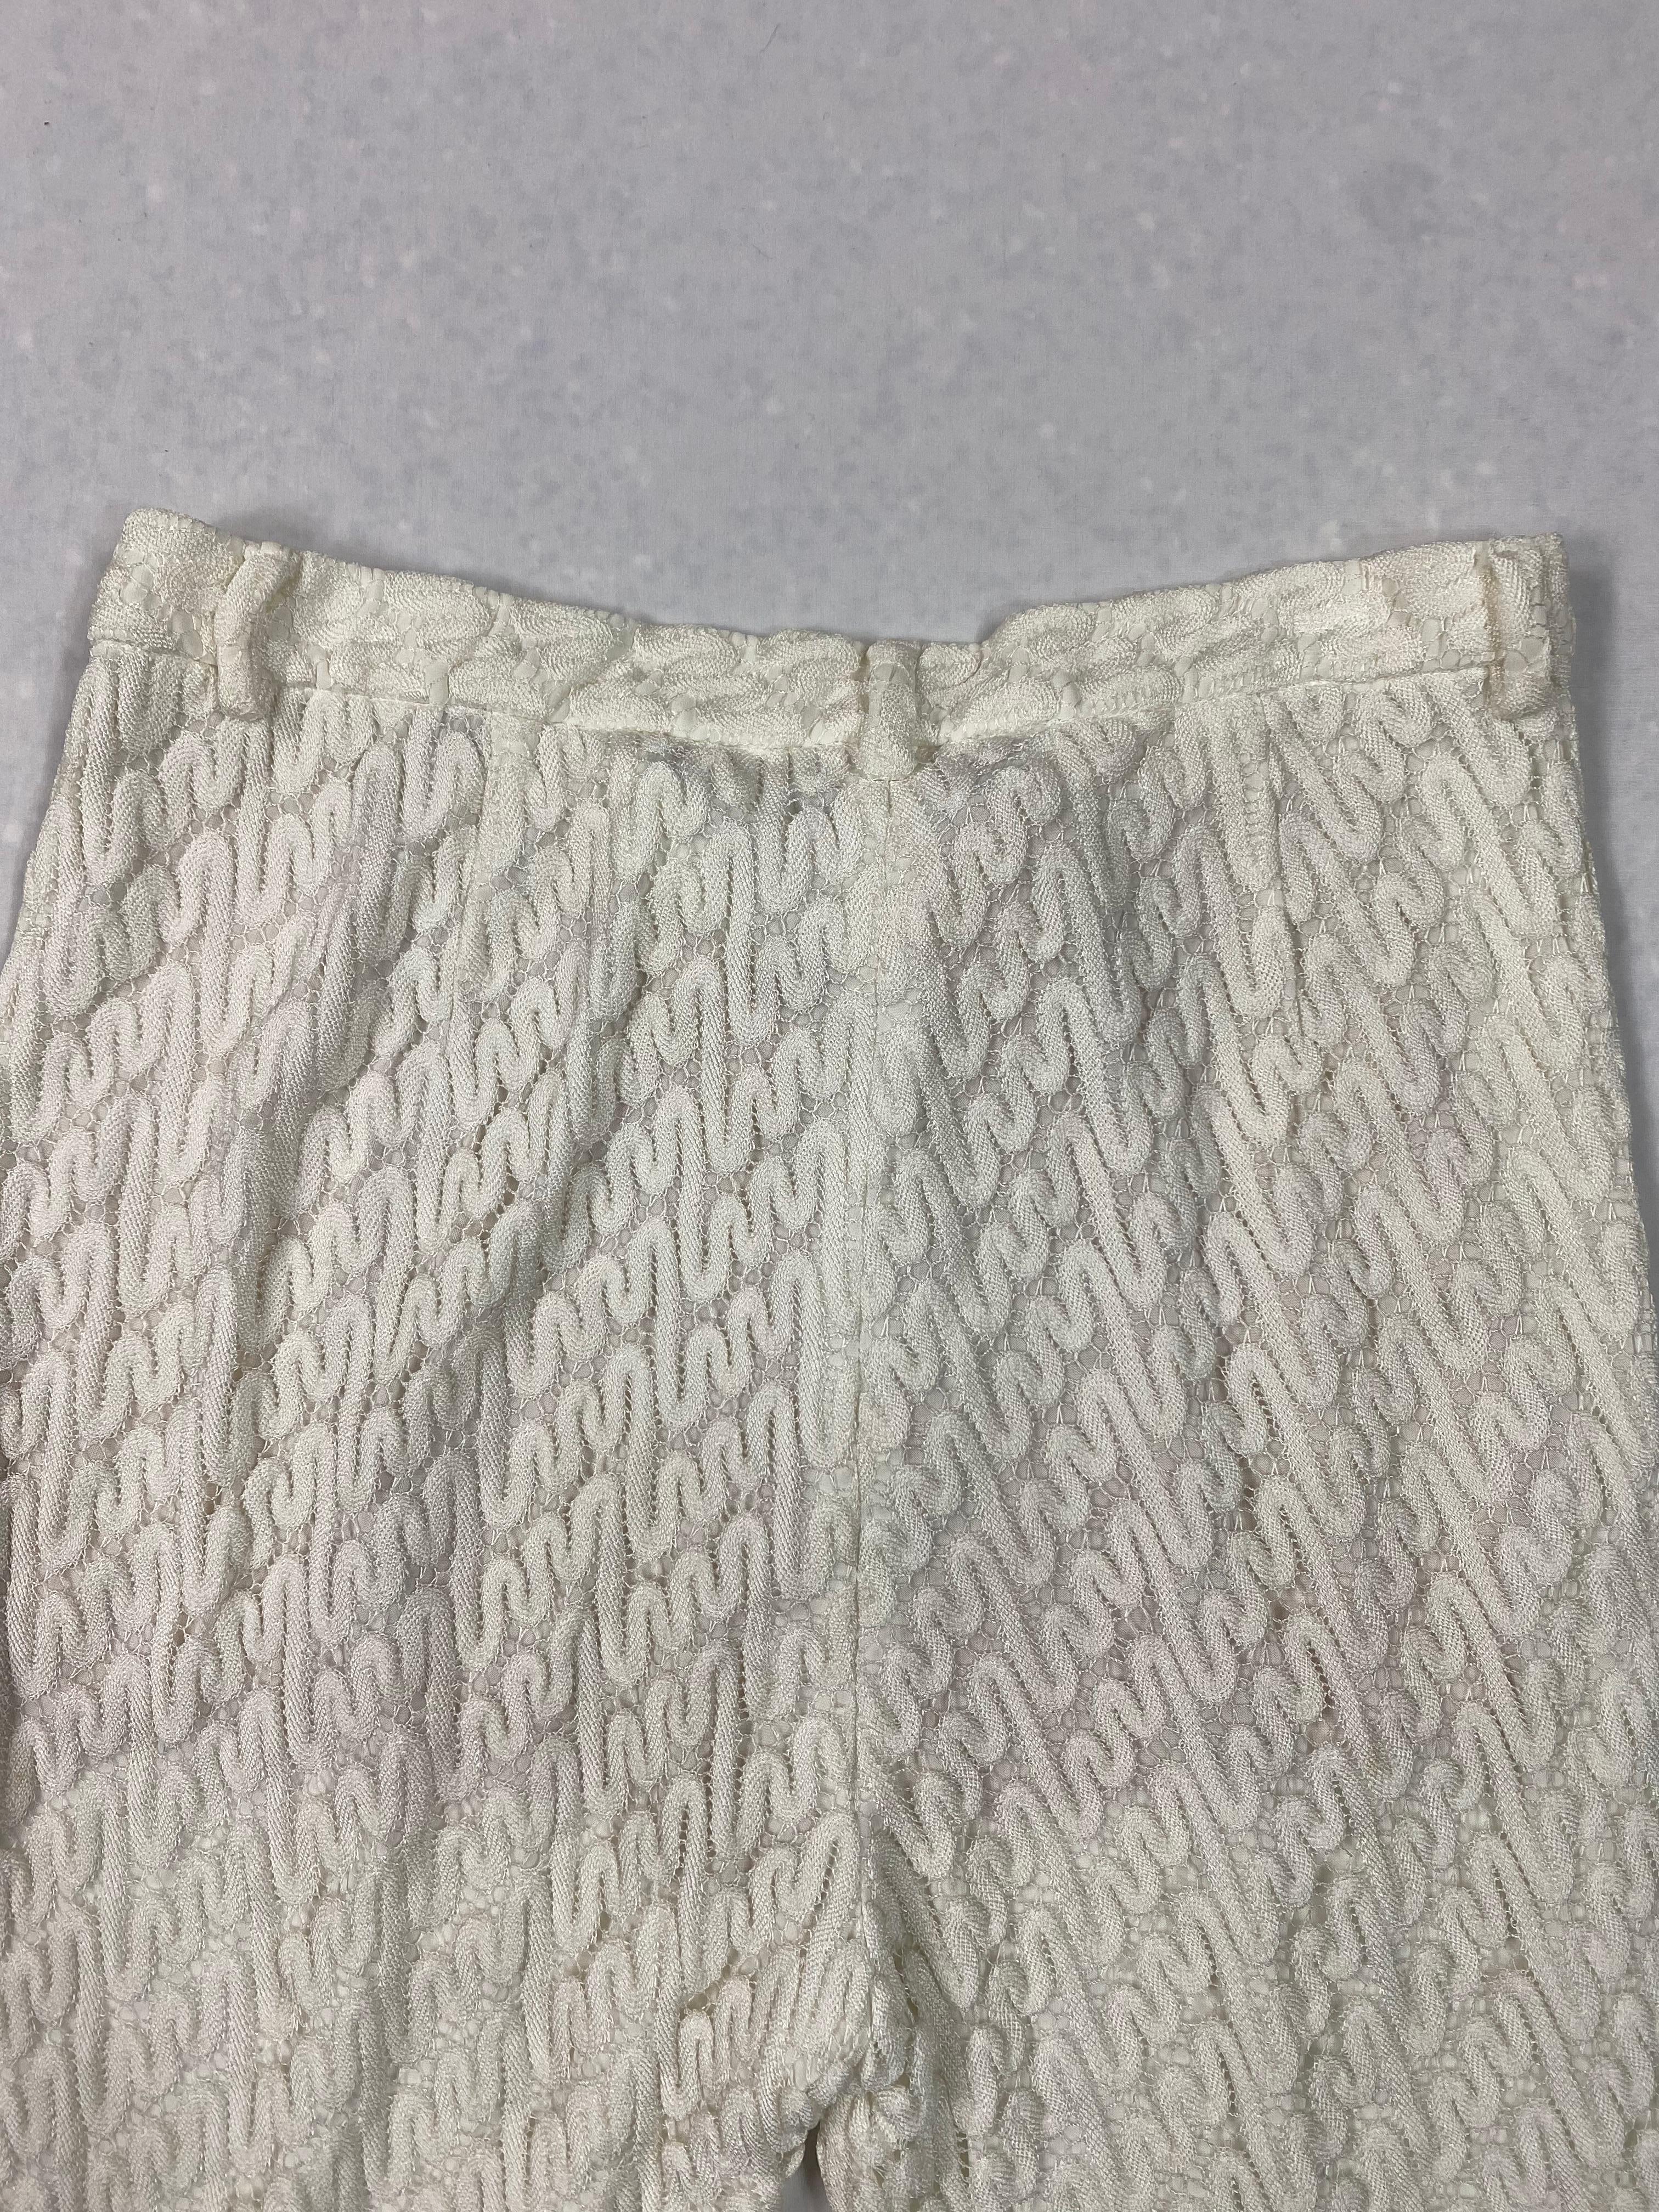 Vintage Missoni White Capri Pants In Excellent Condition For Sale In Beverly Hills, CA